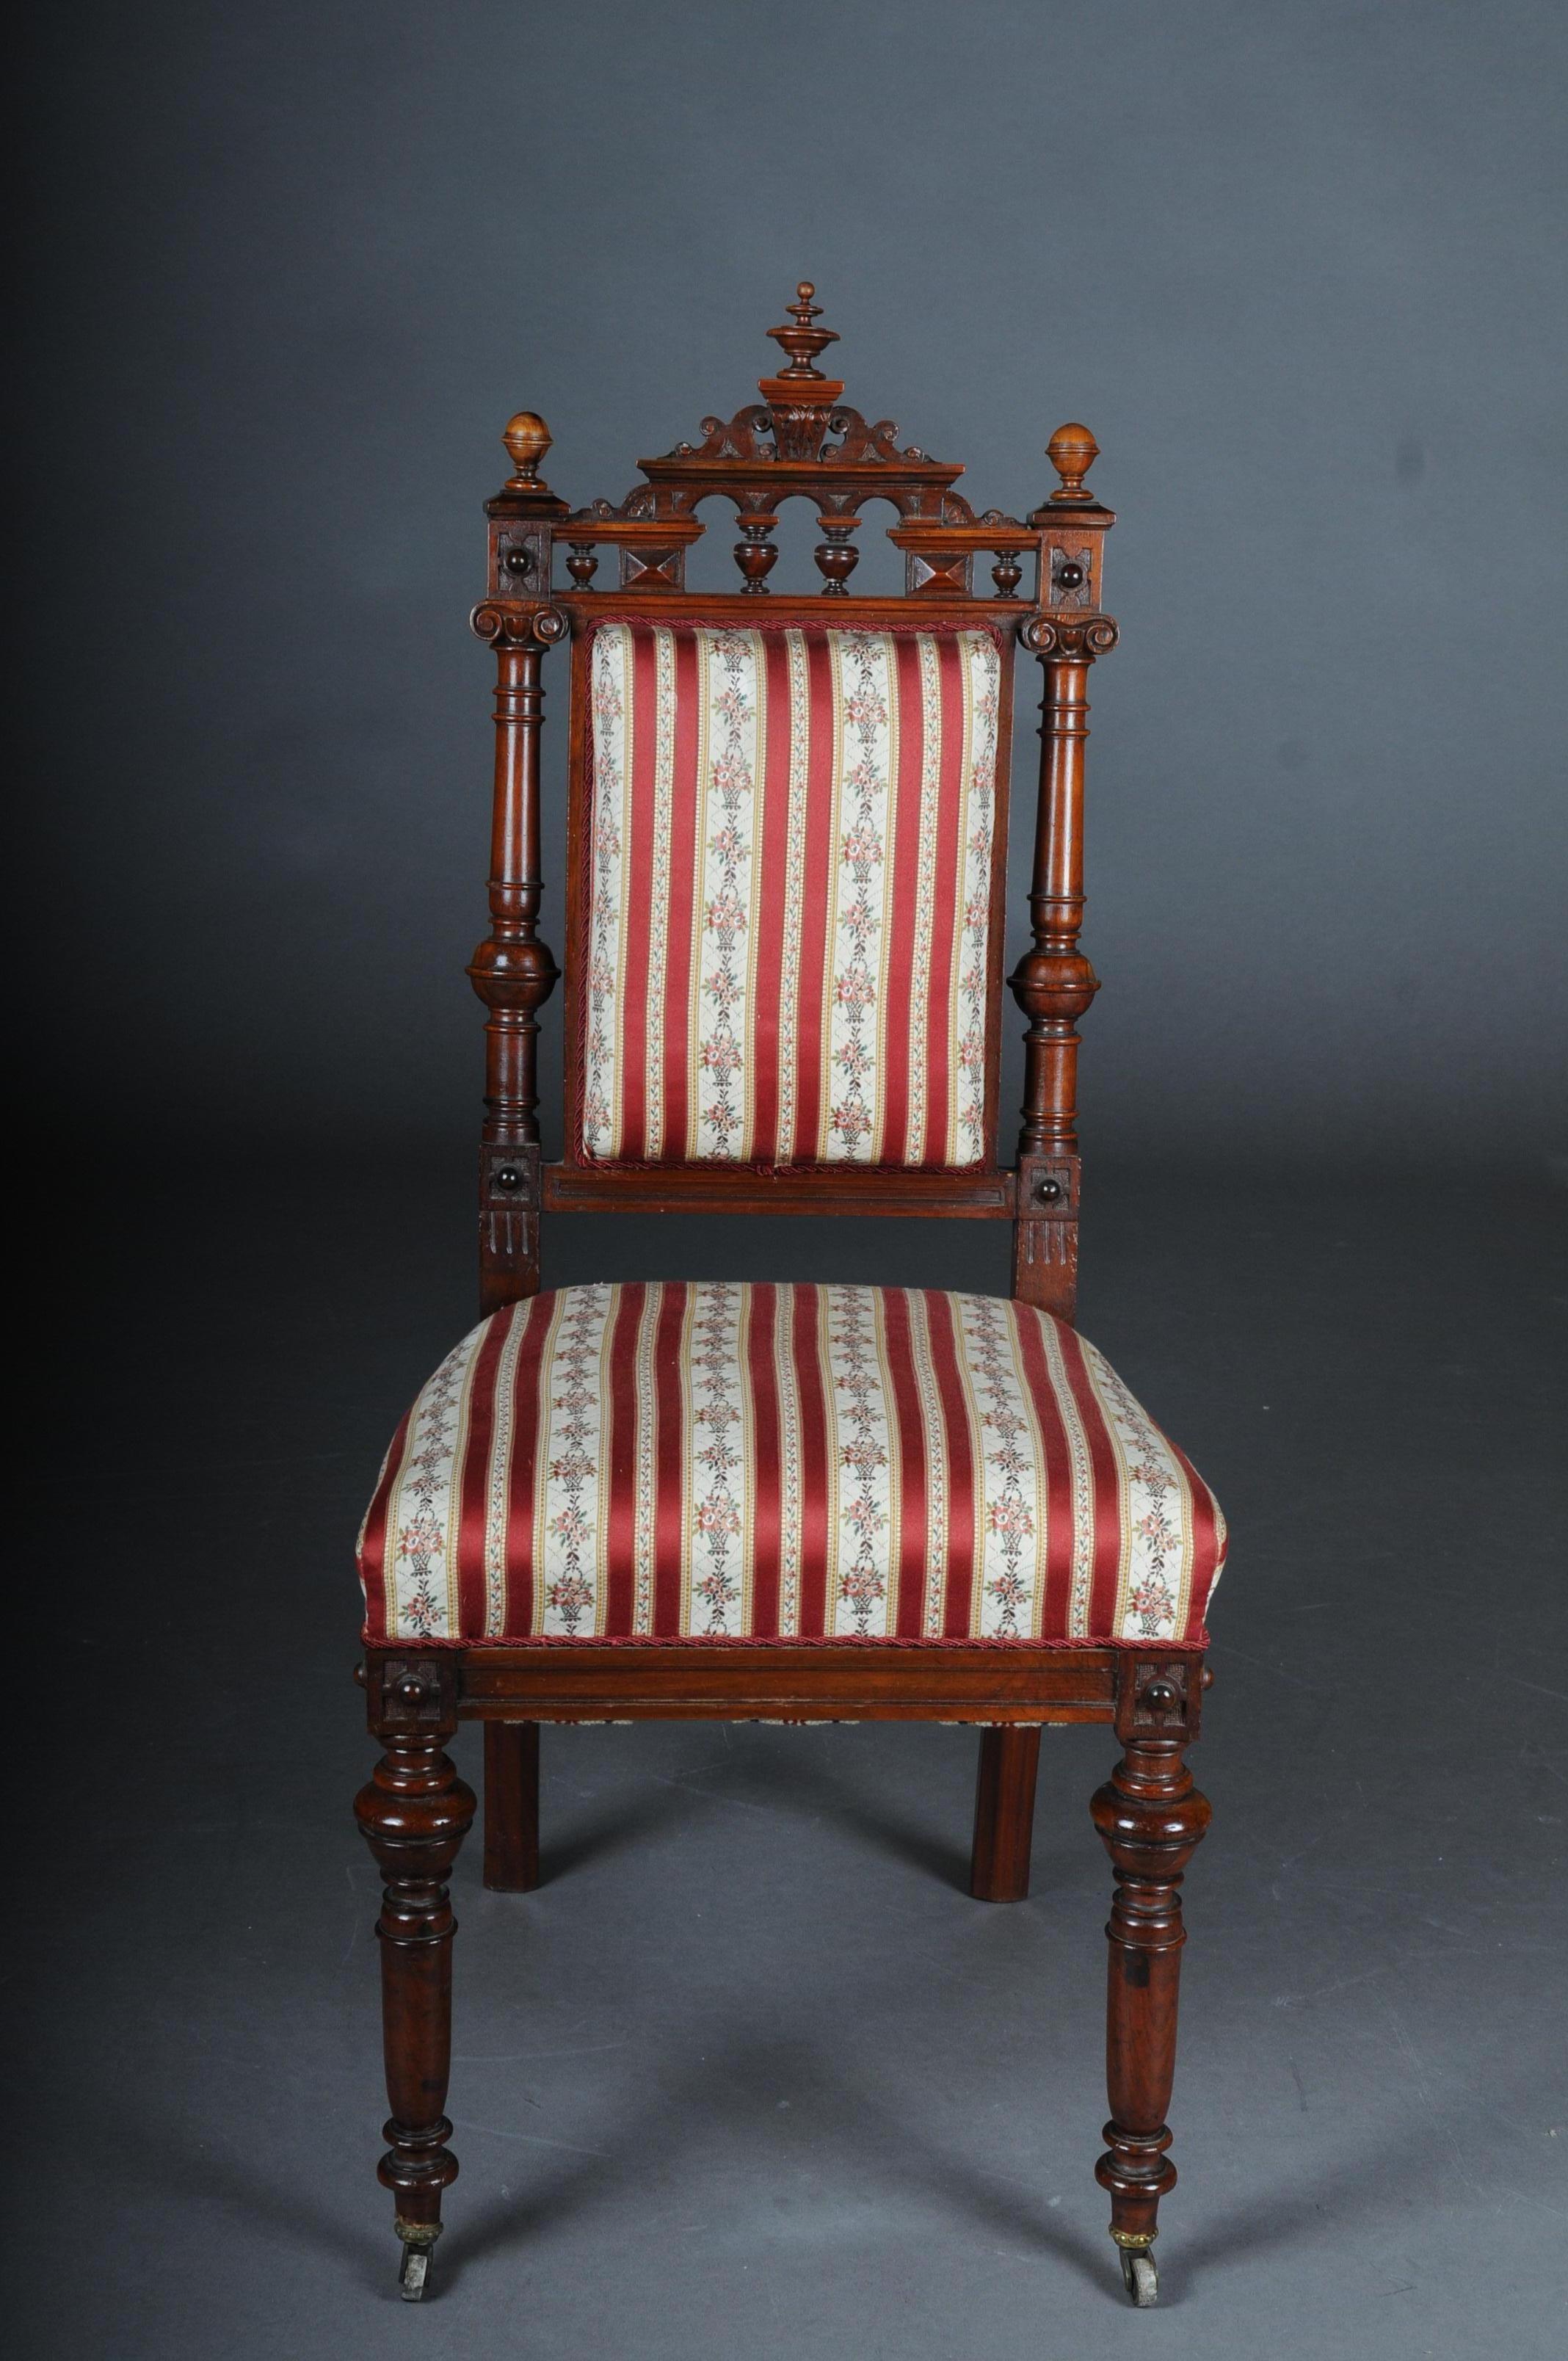 Historicism salon sofa, 2 armchairs, 4 chairs circa 1870, walnut

Walnut with relief carving. Baluster front legs on wheels, rear square legs merging into architectural backrest with dolls. Striped padding, circa 1870.

(B-174).